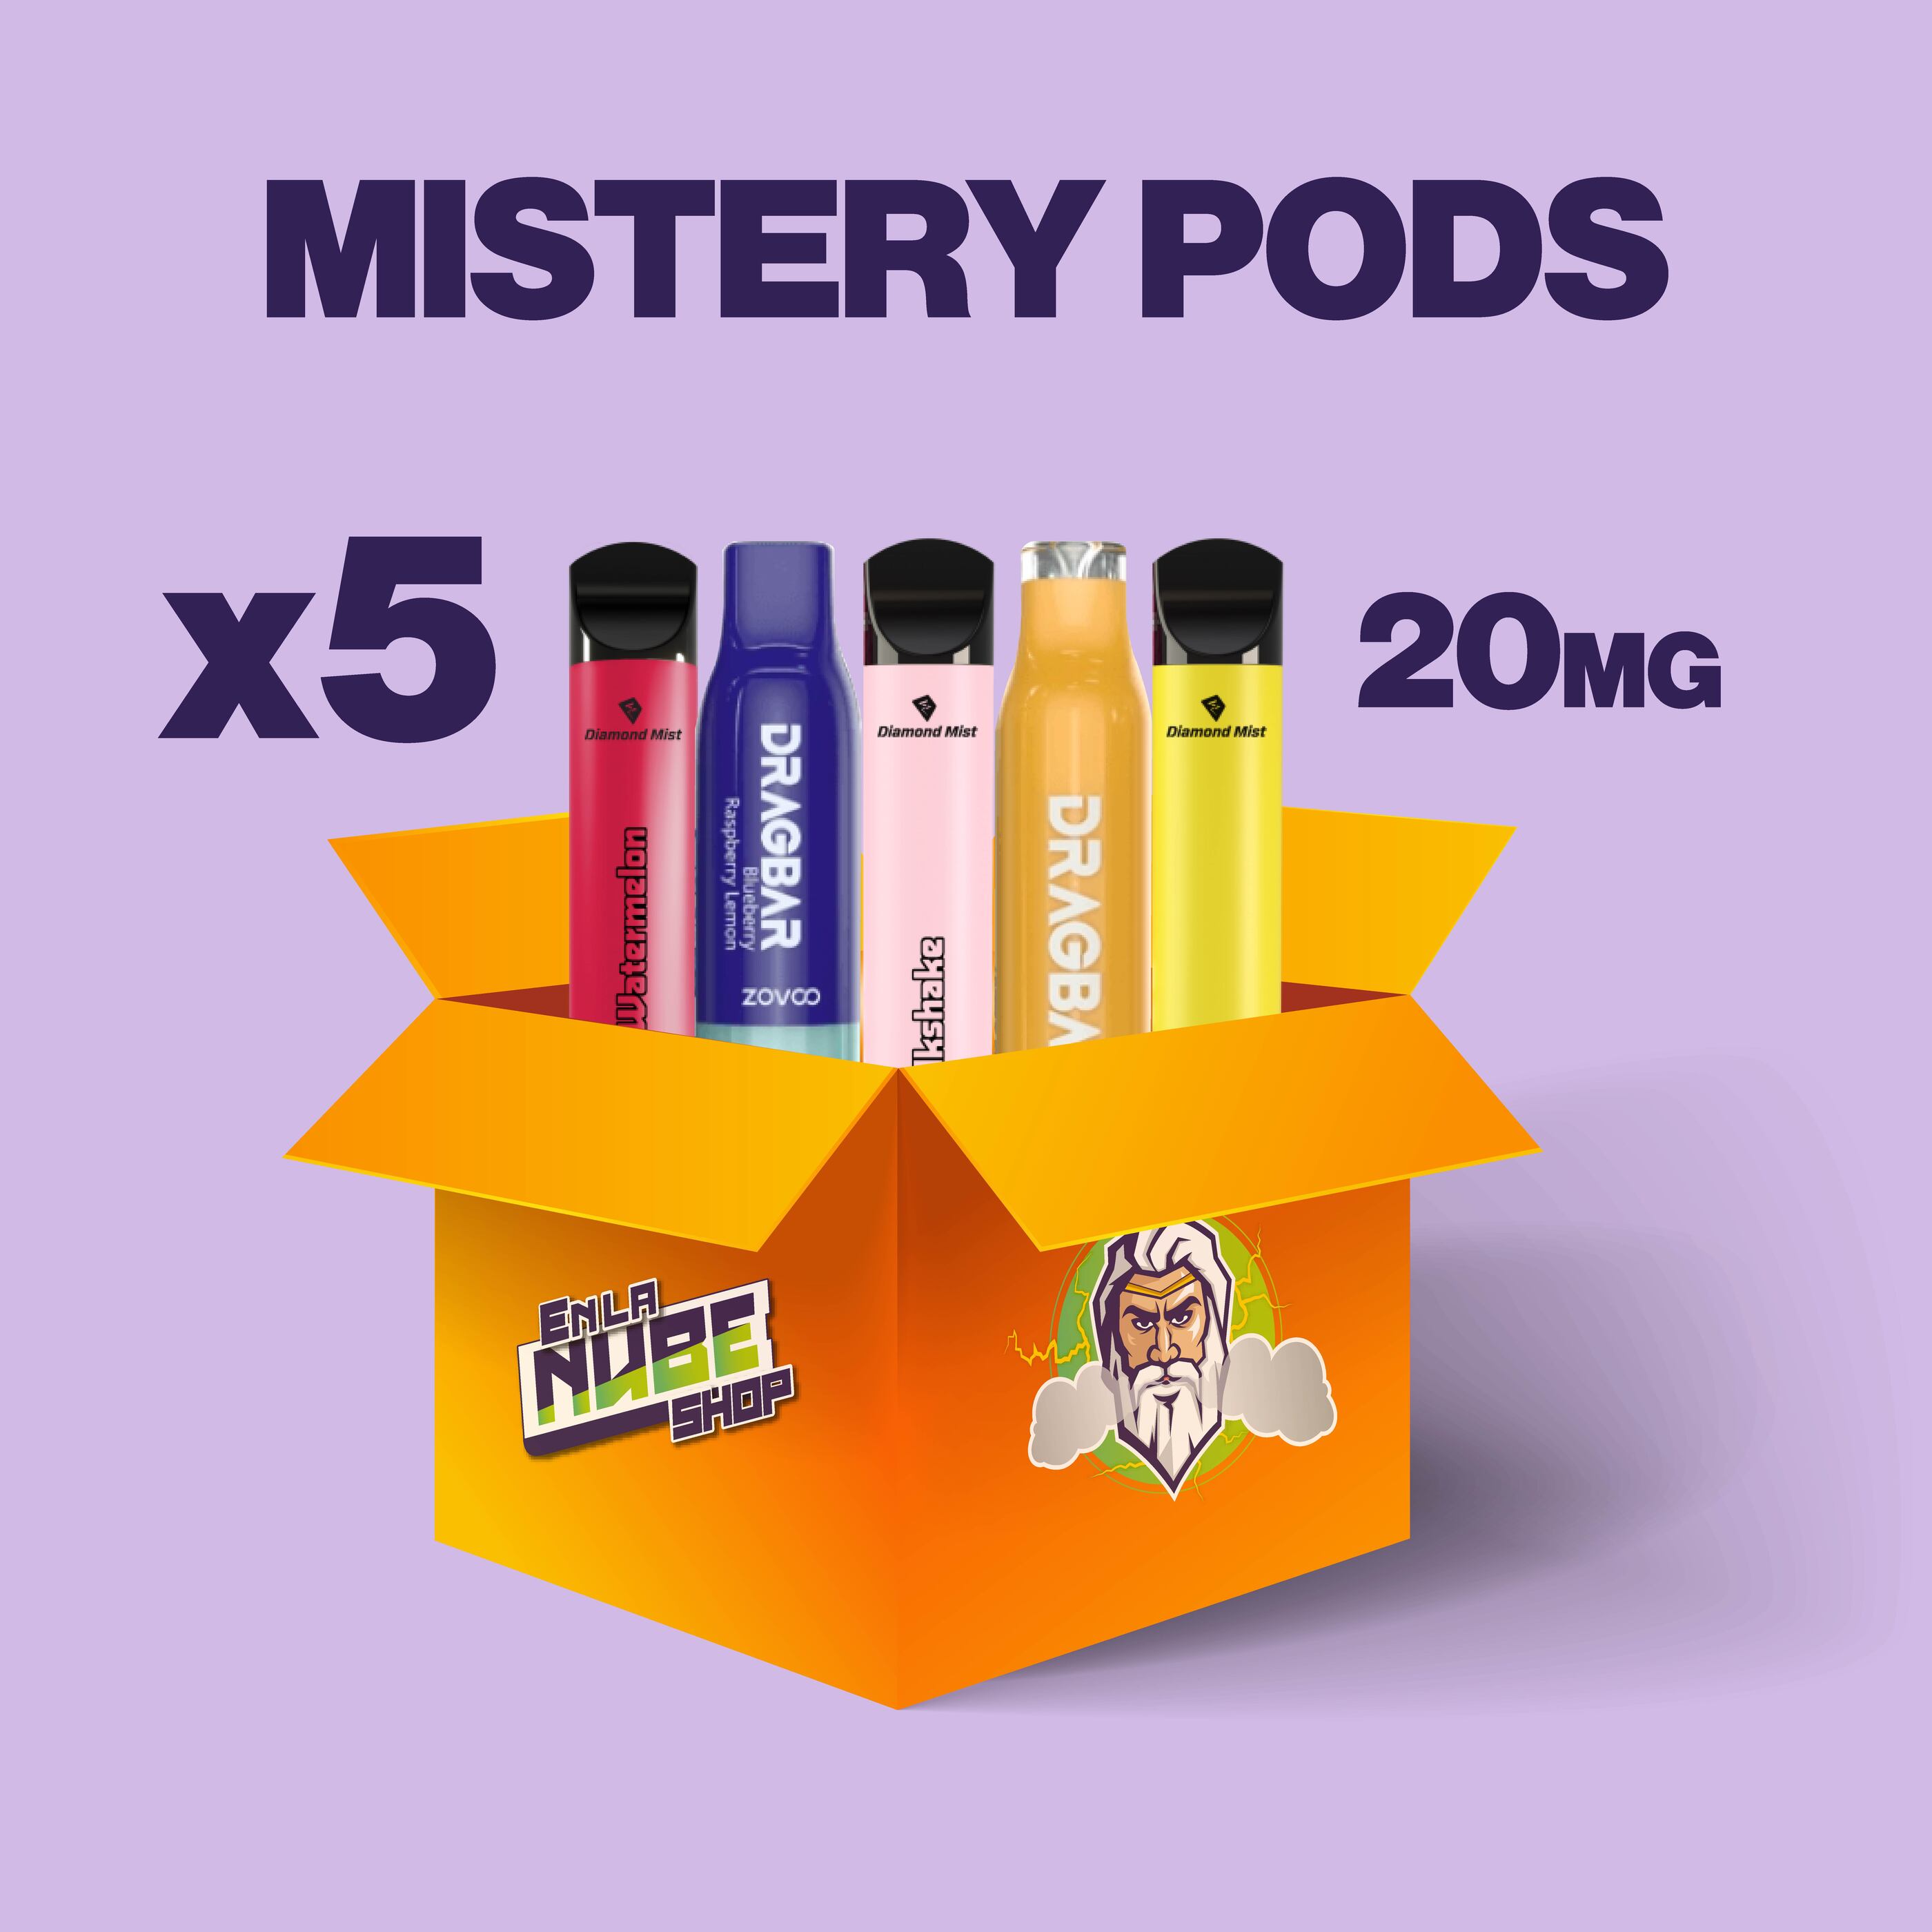 PACK 5 PODS 20MG MISTERY PODS